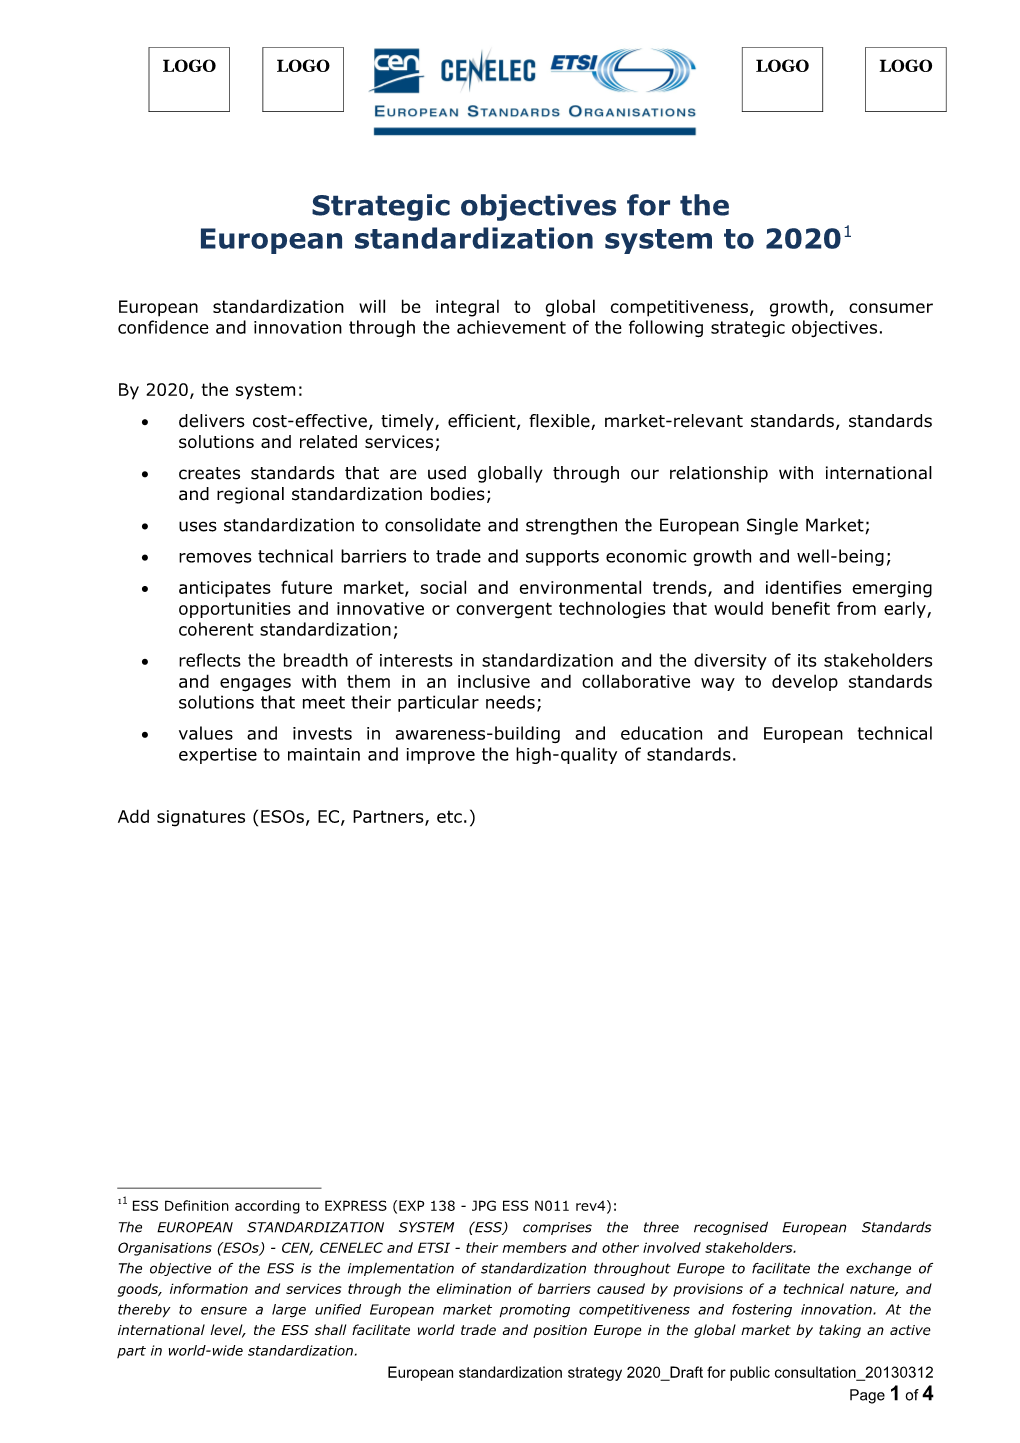 Strategic Objectives for the European Standardization System to 2020 1